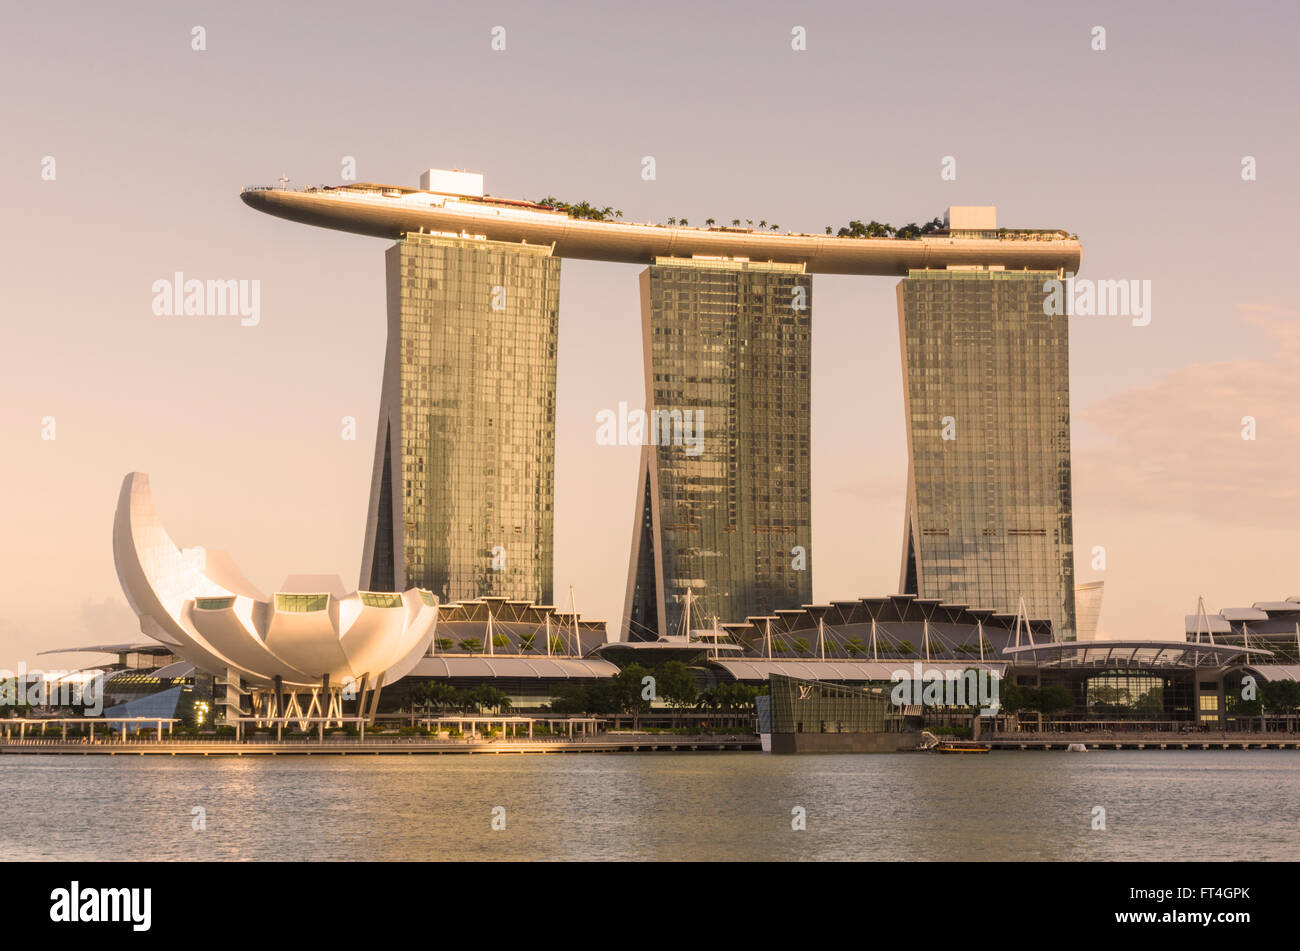 Marina Bay Sands Hotel and ArtScience Museum bathed in golden late afternoon sun, Marina Bay, Singapore Stock Photo